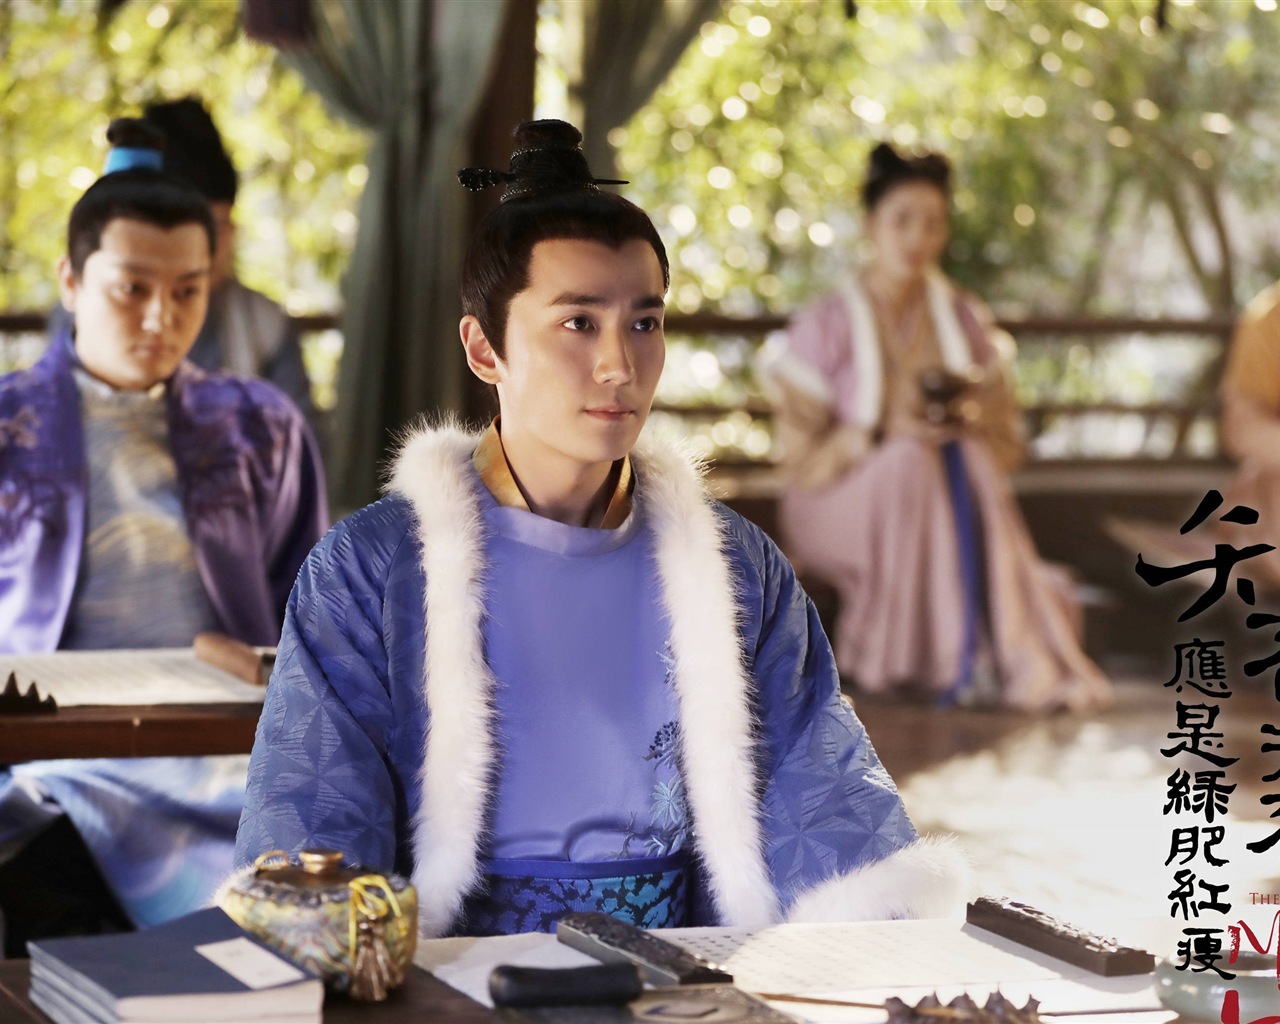 The Story Of MingLan, TV series HD wallpapers #52 - 1280x1024